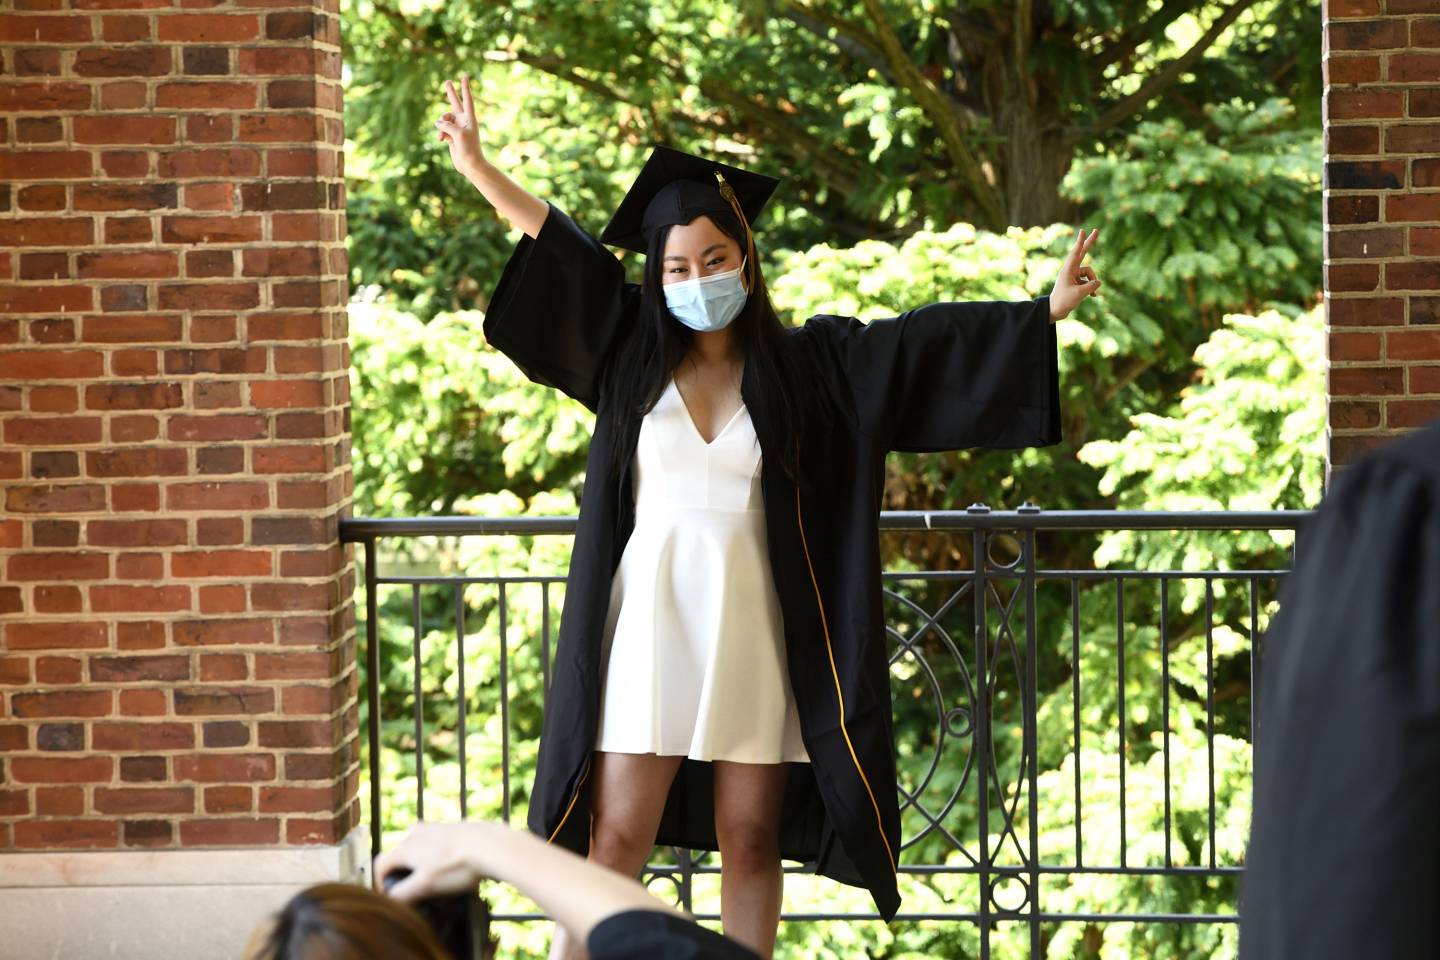 A student in cap and gown and a mask poses for a photo